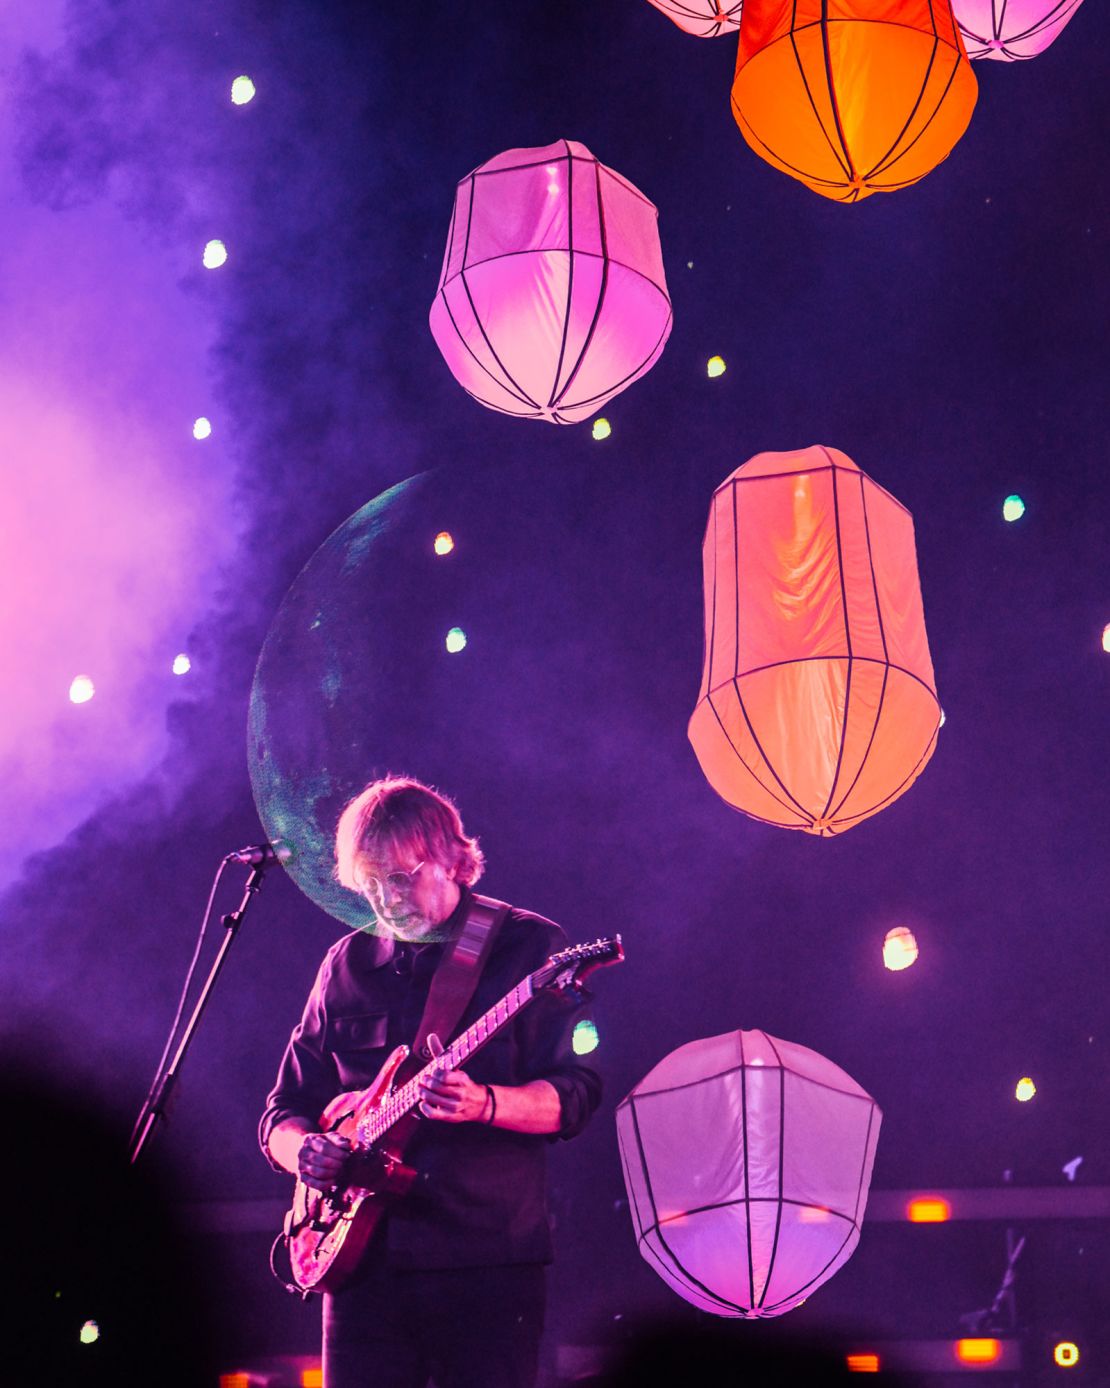 Phish's Trey Anastasio: "We feel like we owe ... (our fans) a new, fresh experience.”